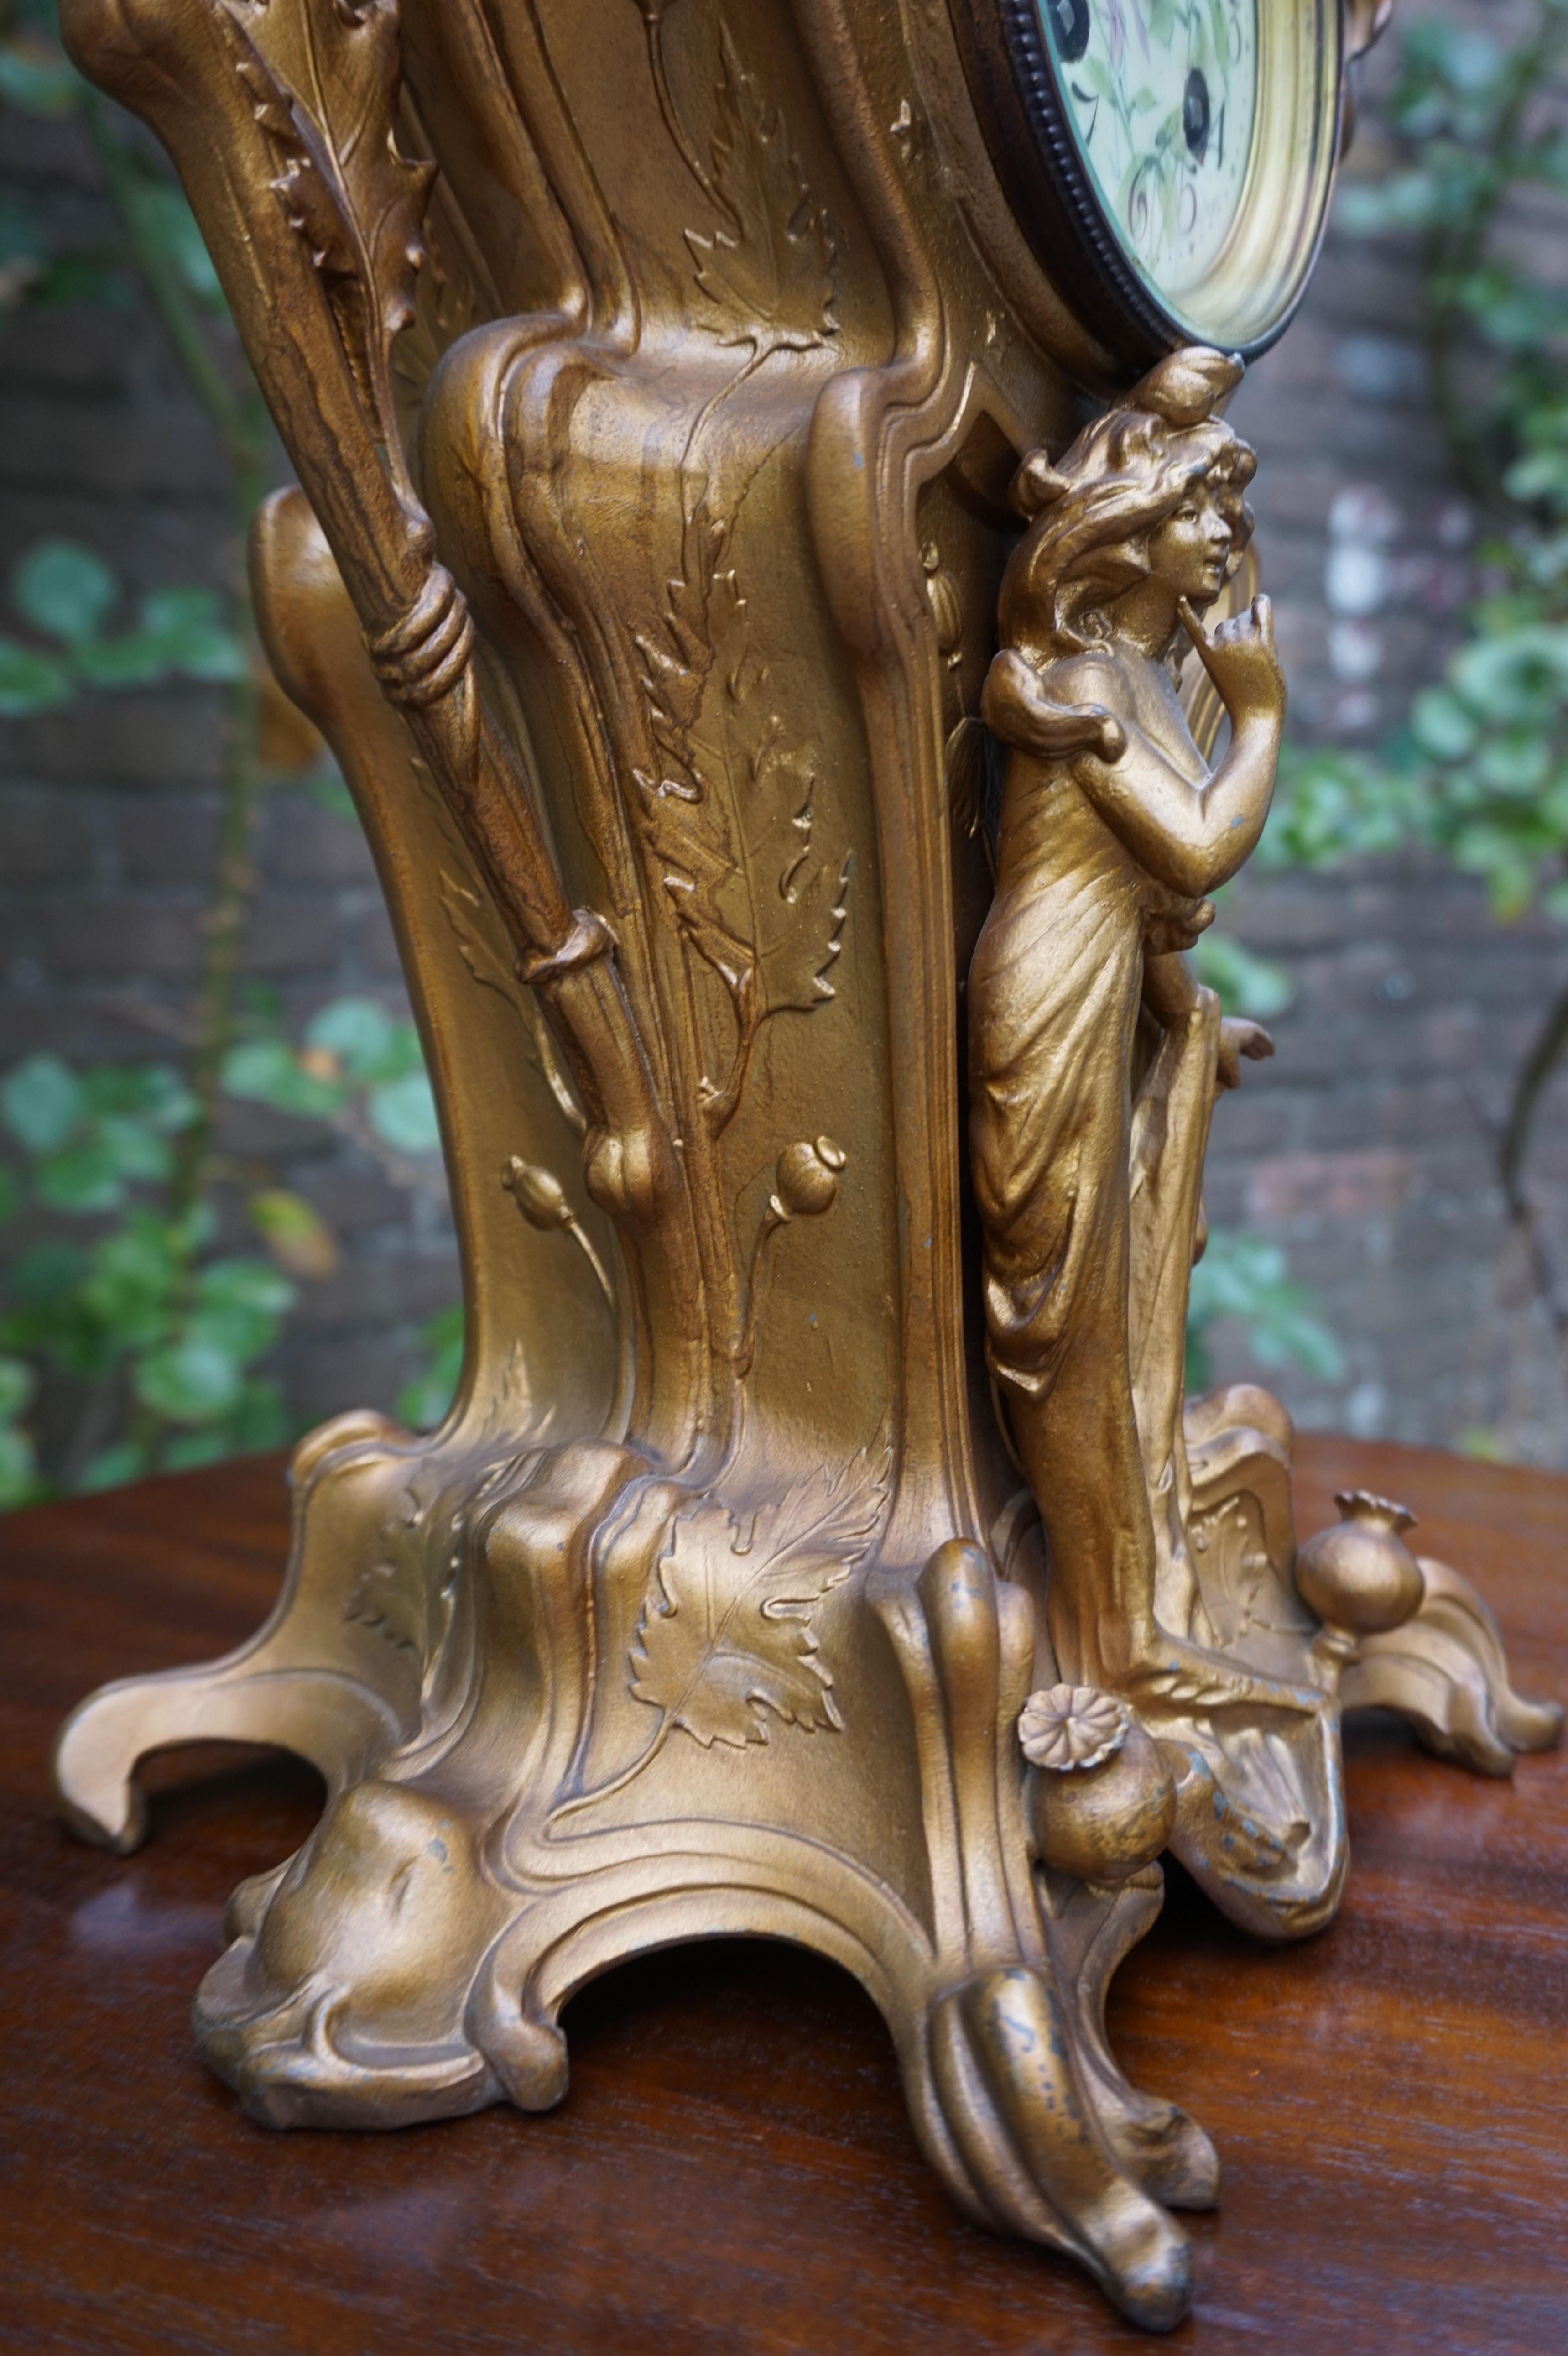 Cast Stunning Early 20th Century Golden Color Art Nouveau Table or Mantel Clock